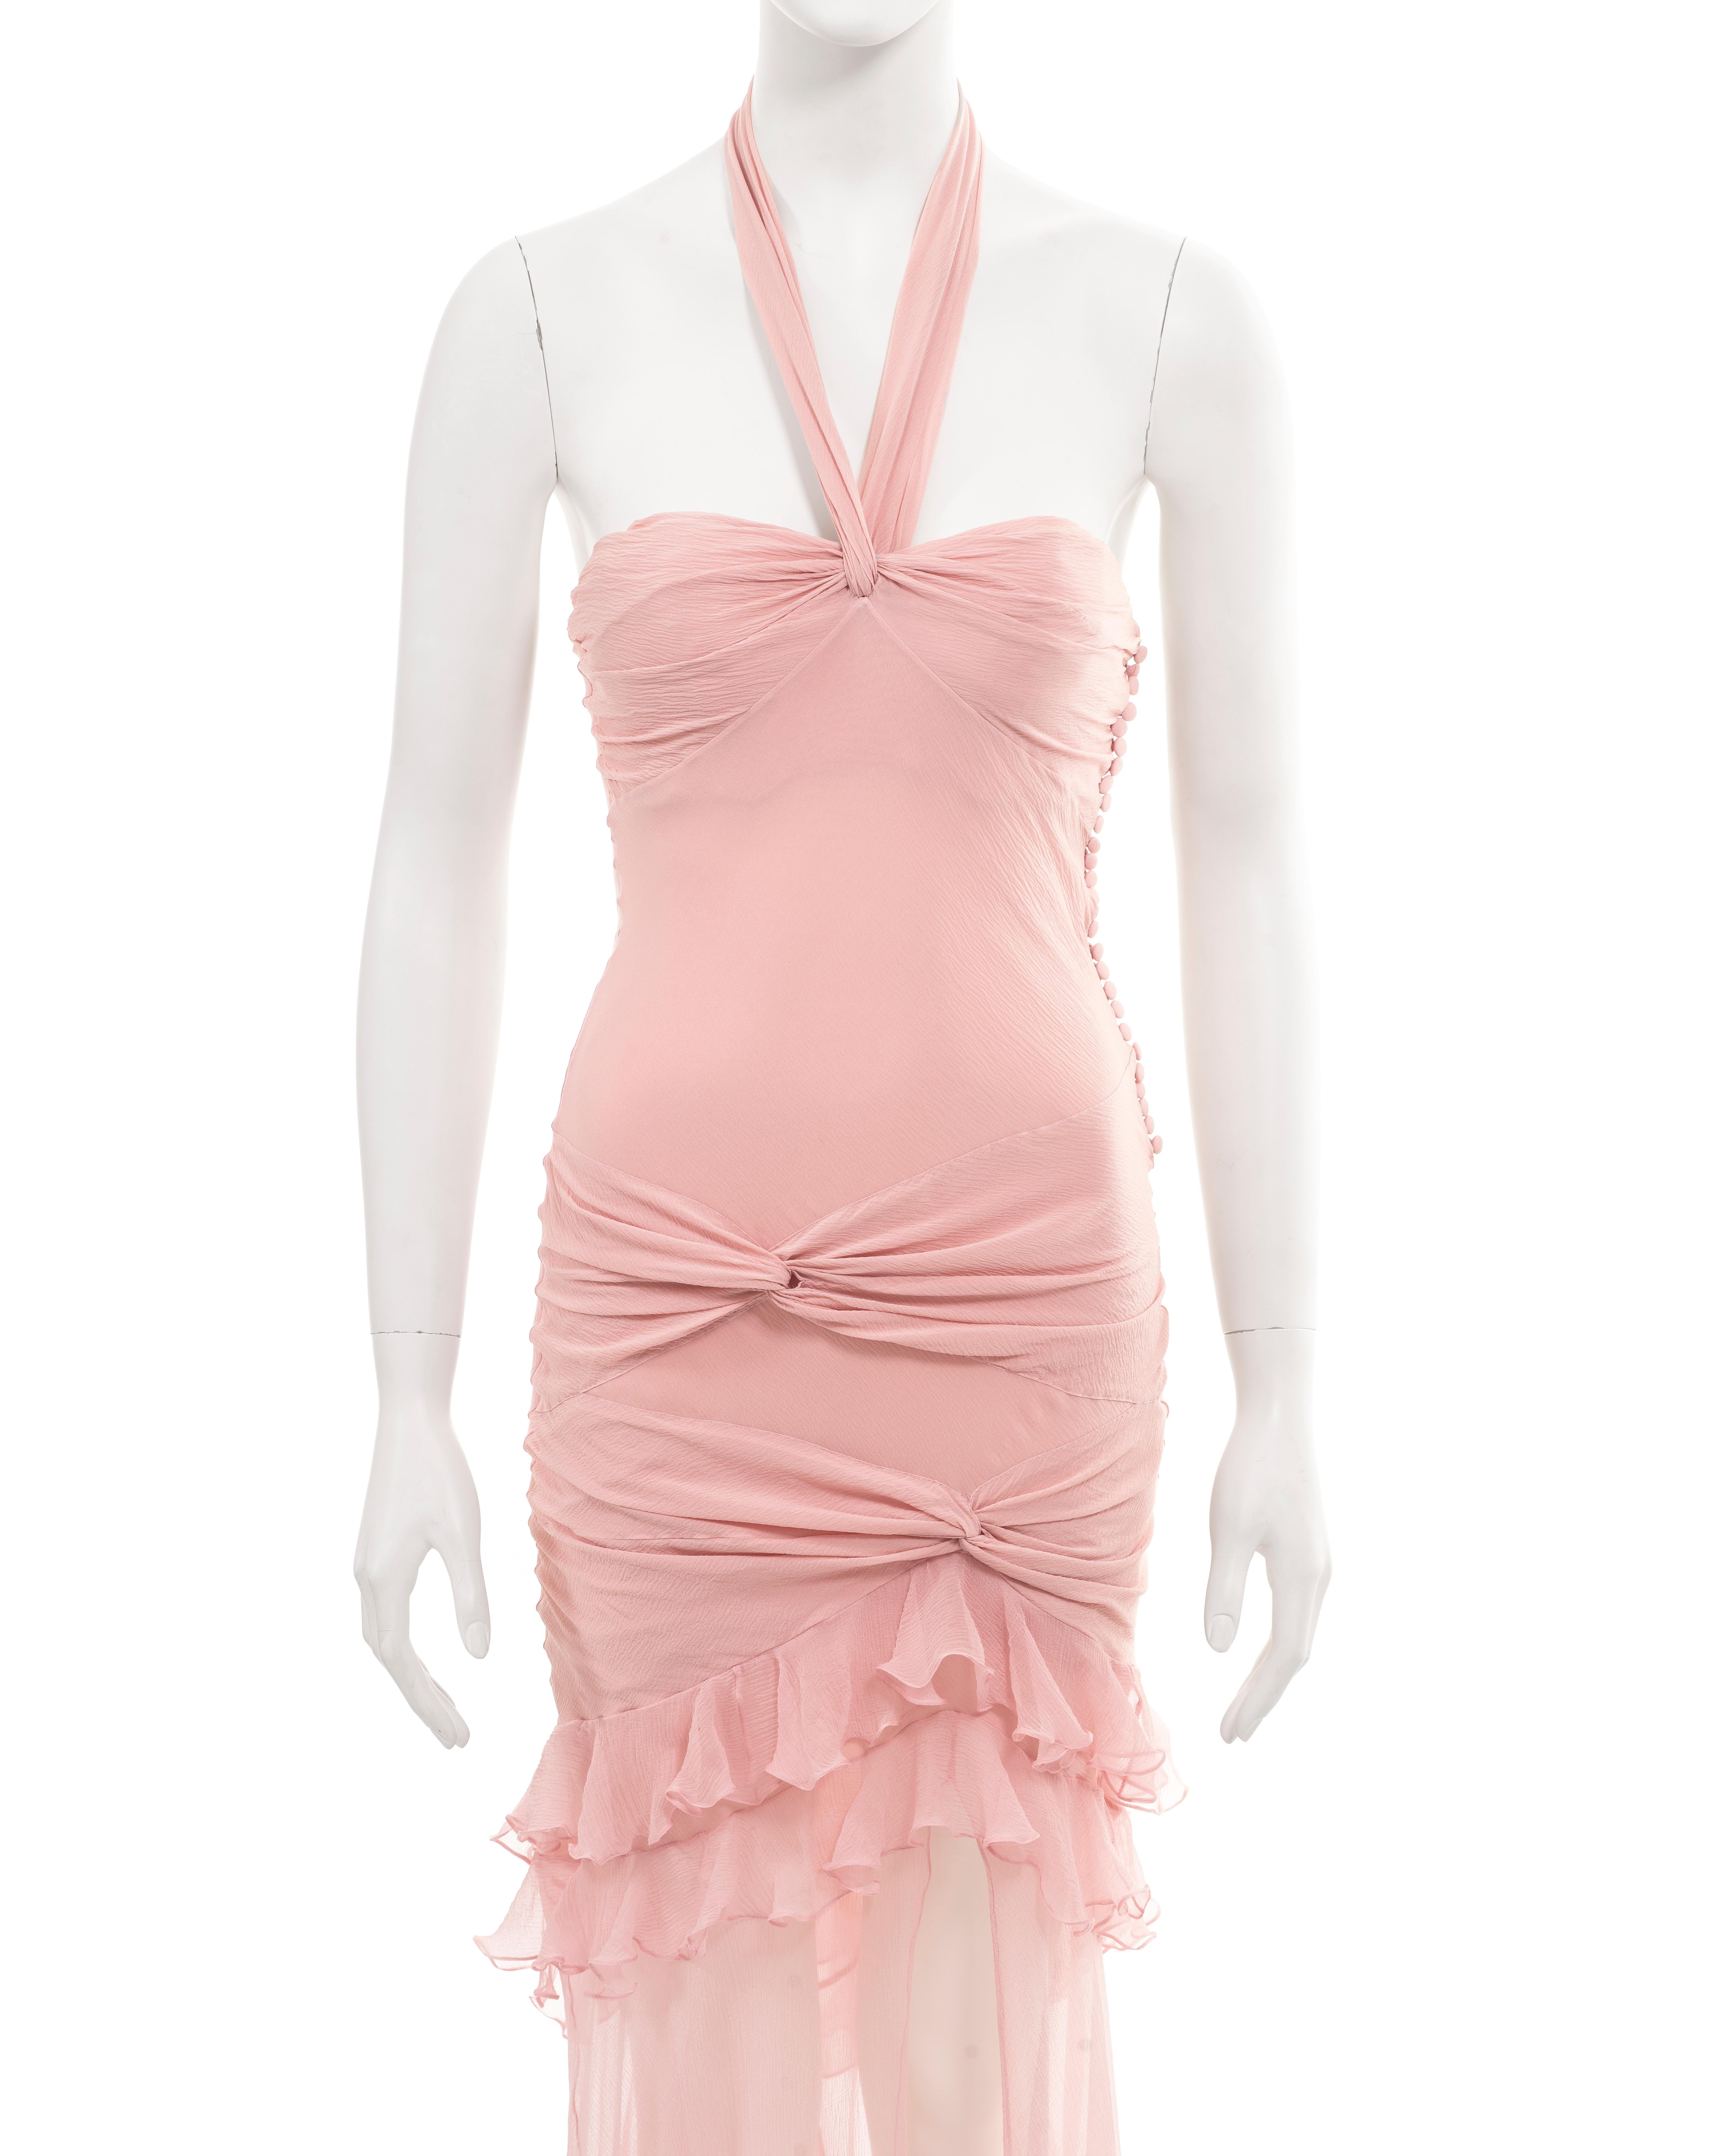 Women's or Men's Christian Dior by John Galliano pink silk halter neck evening dress, ss 2004 For Sale